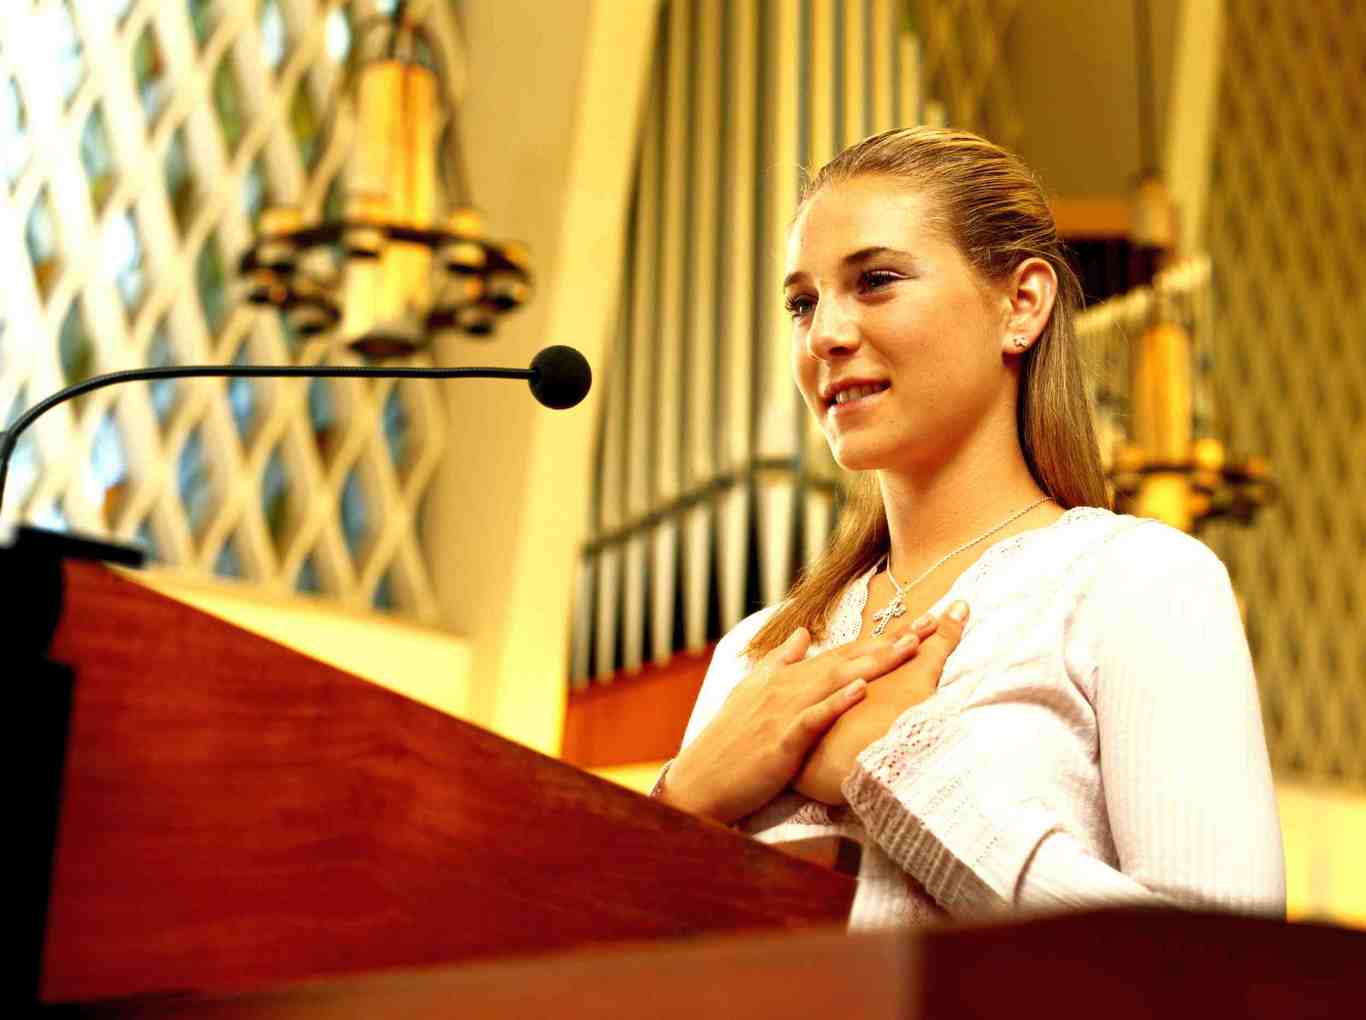 Easy Steps to Improve Eulogy Speech Writing